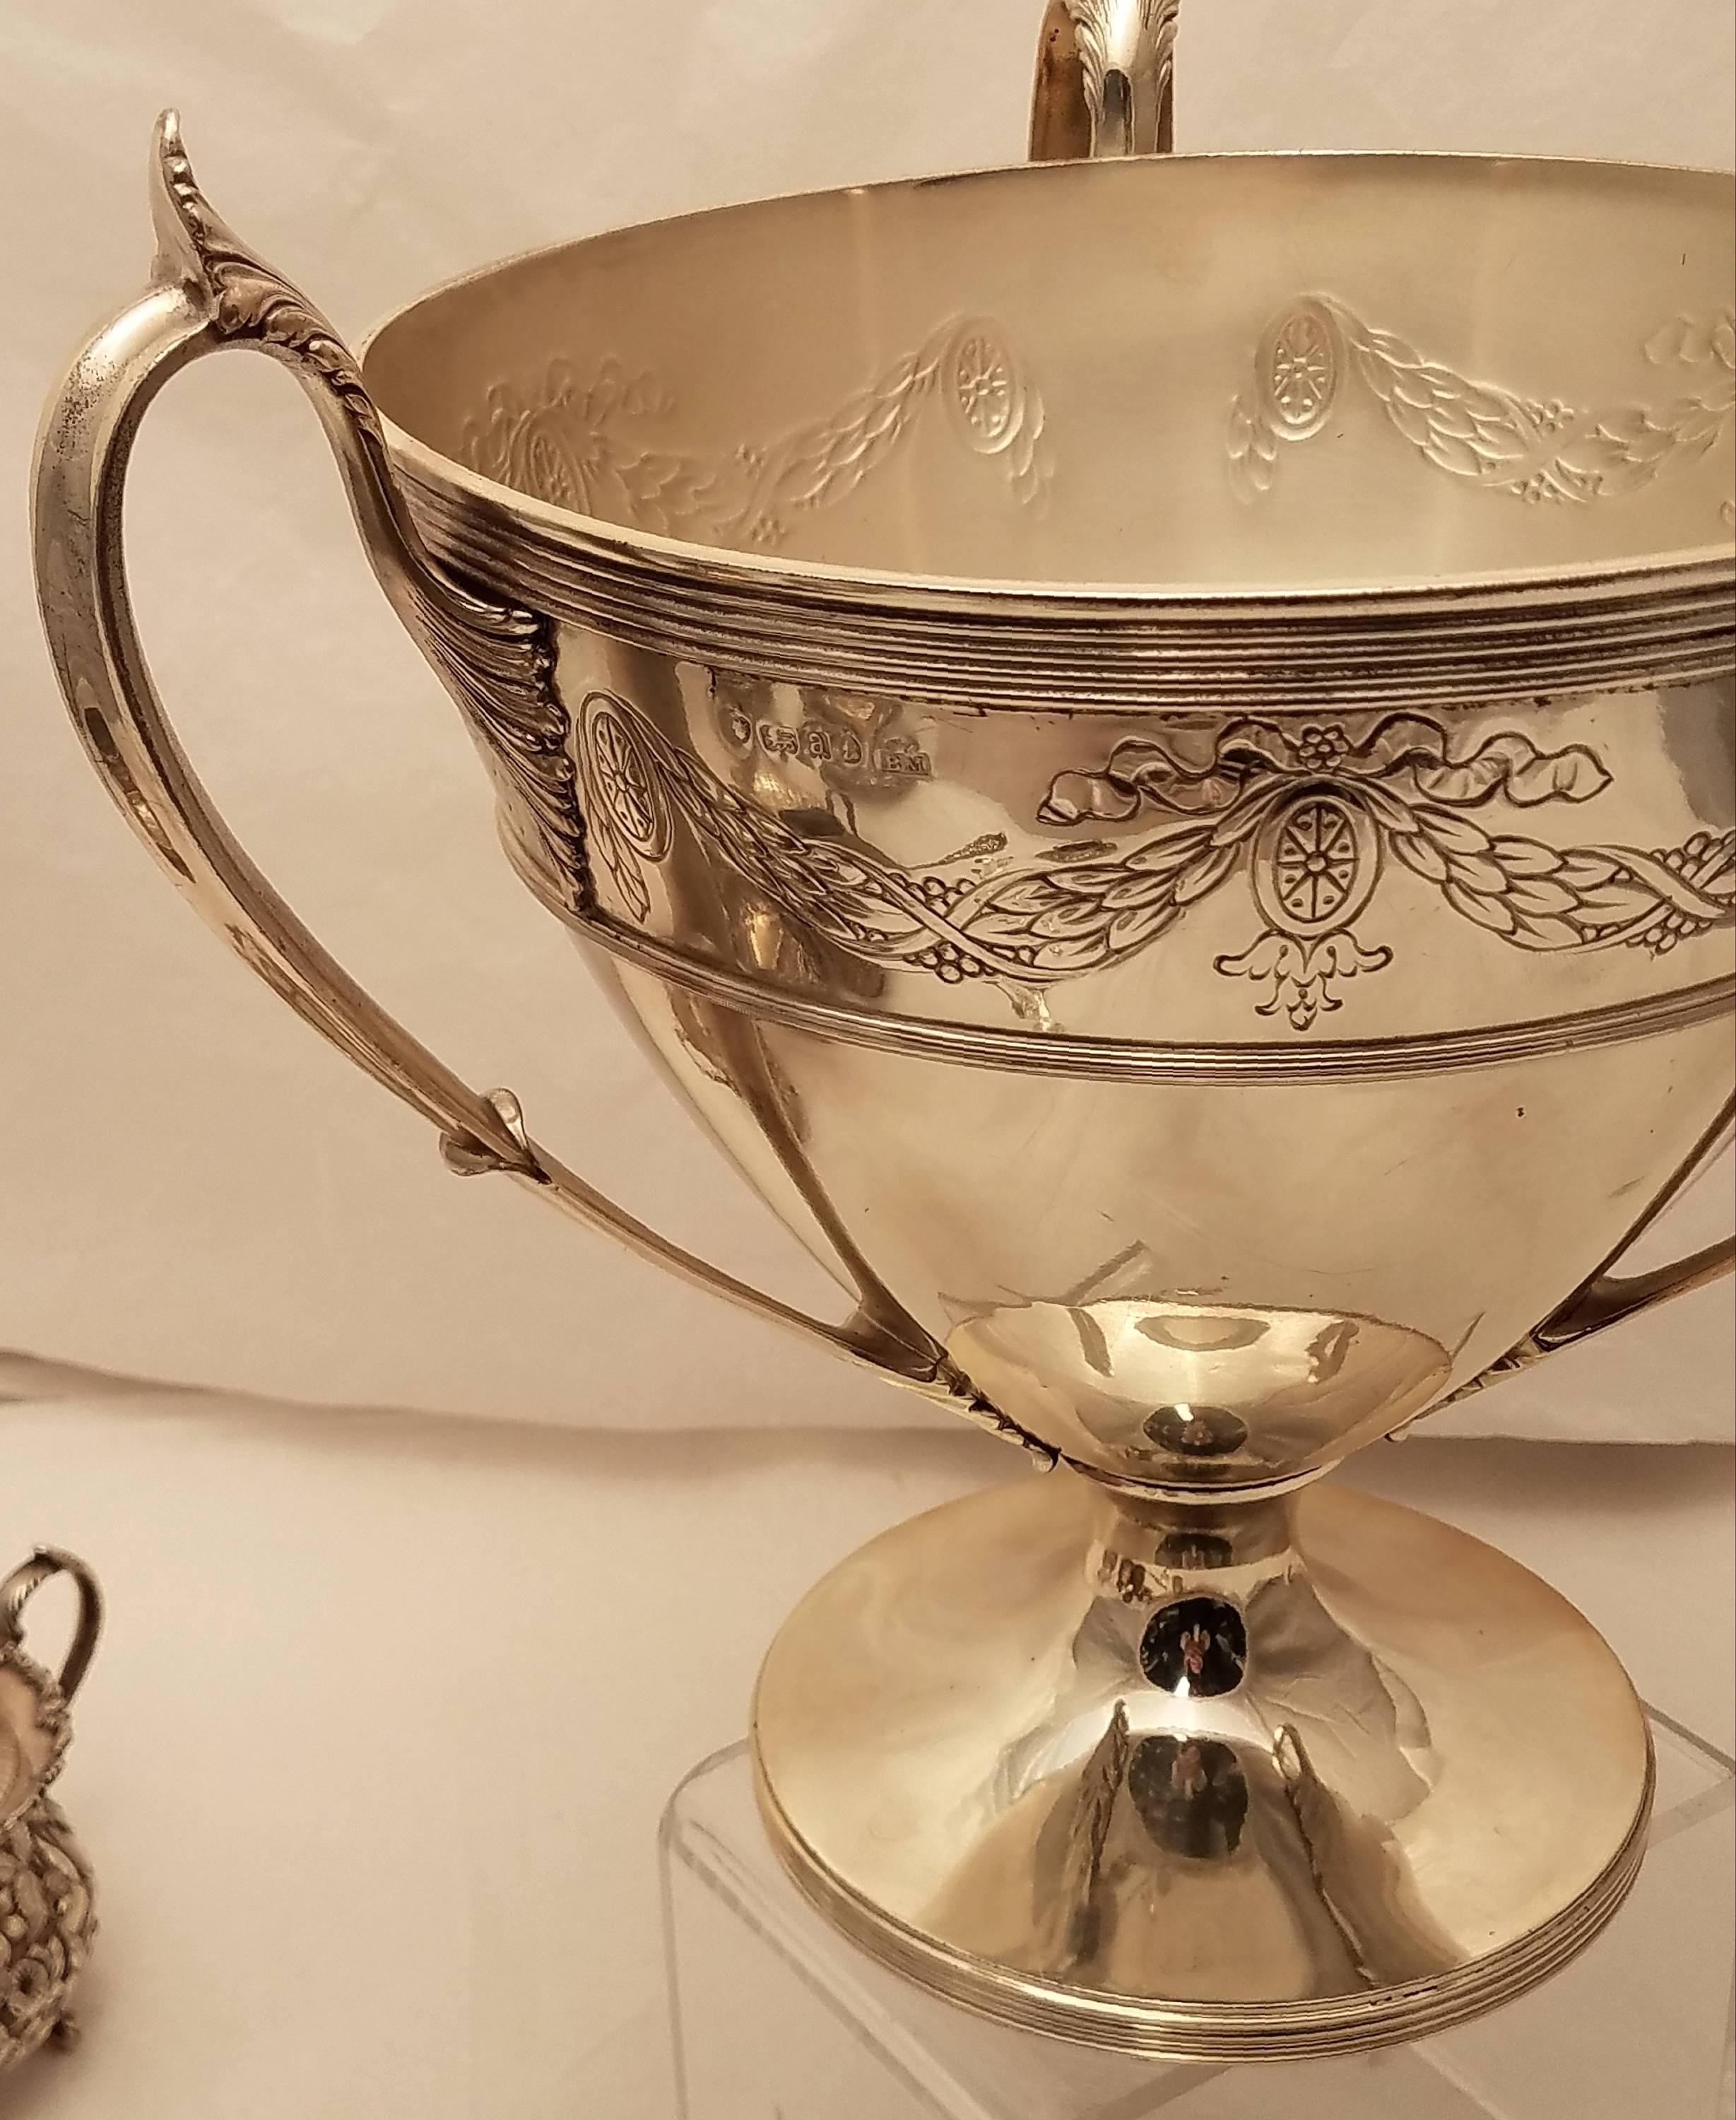 Magnificent English sterling silver three handled trophy with ornate design and leaf like pattern on handles, possibly by Berthold Muller, circa 1916. Weighing 48 troy ounces. Measuring 9.3 inches tall and 11 inches wide. Bearing hallmarks as shown